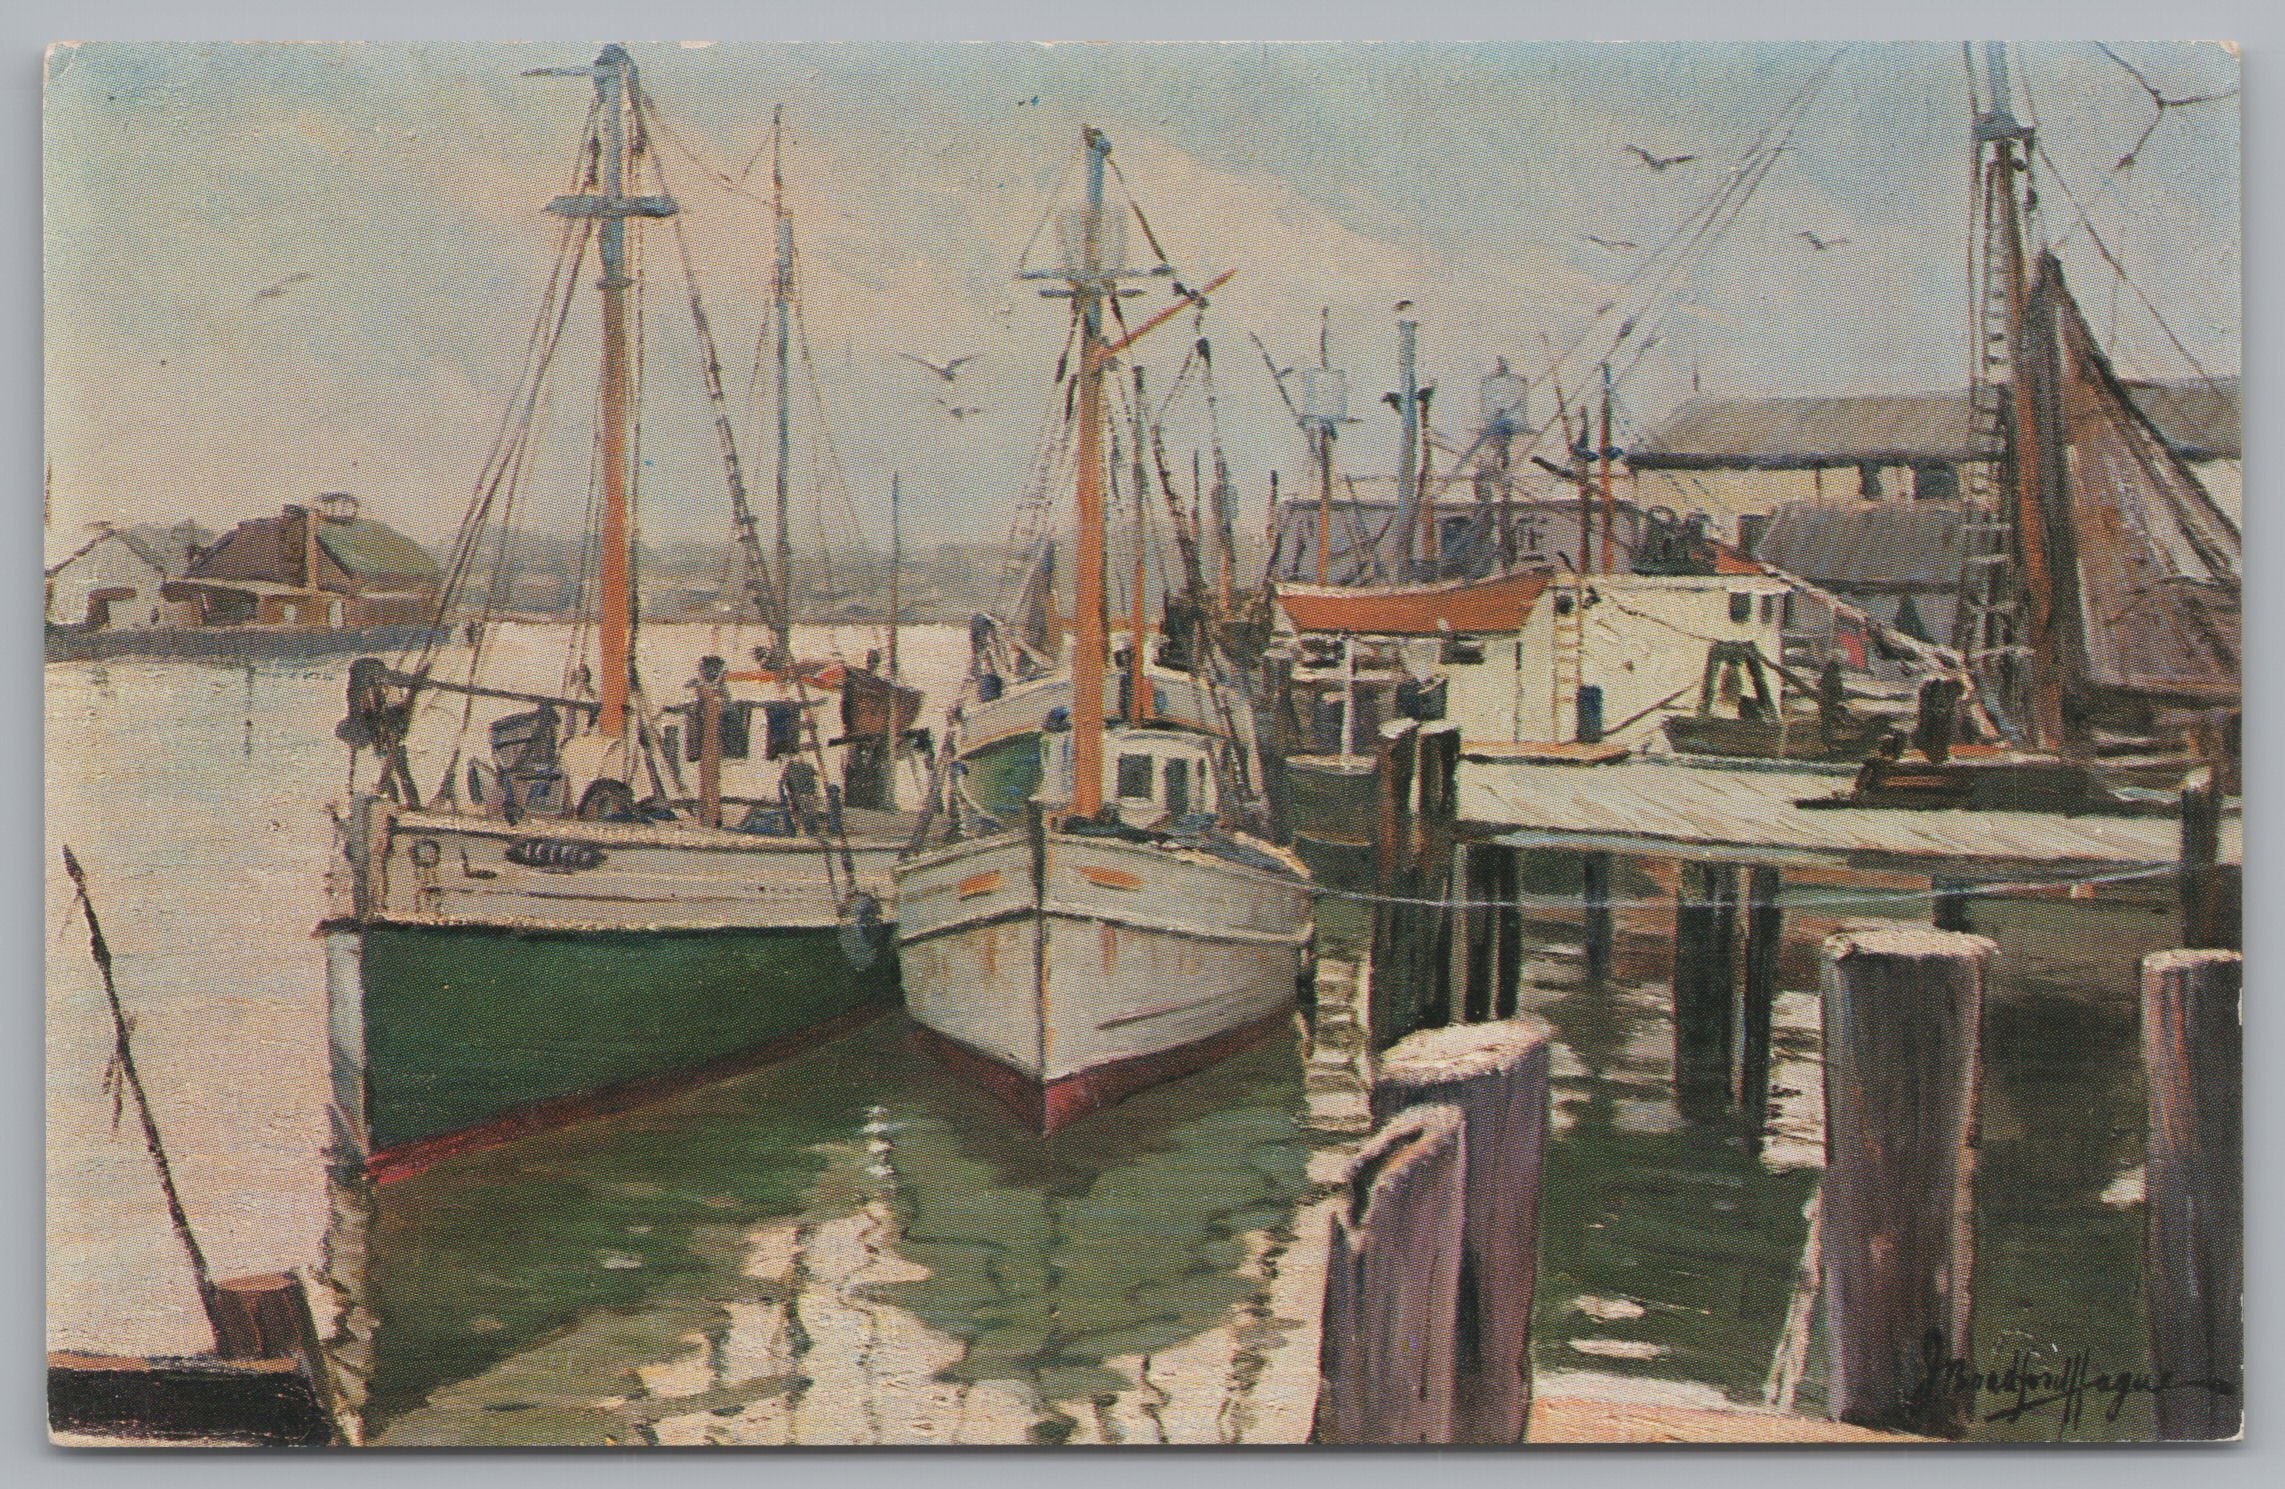 The Harbor, Rockport on Cape Ann Fishing Boats, Vintage Post Card.